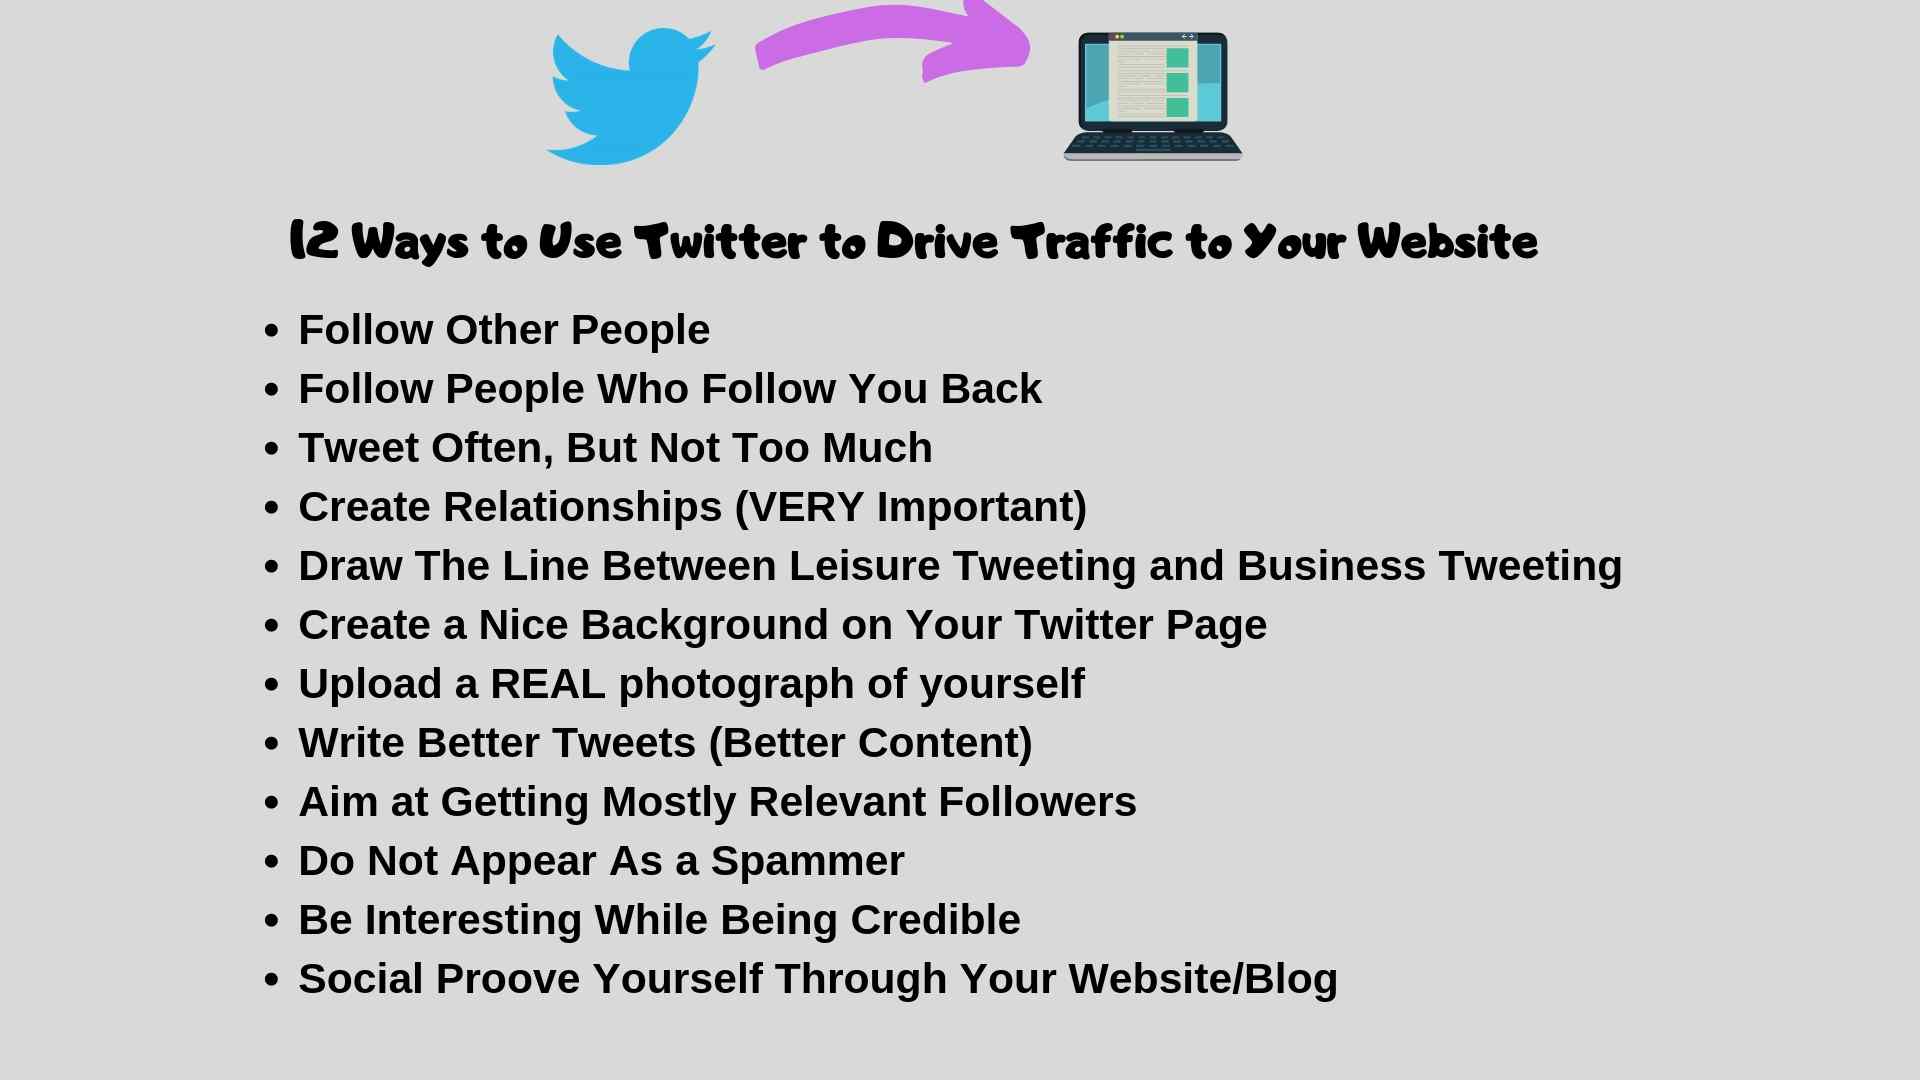 12 Ways to Use Twitter to Drive Traffic to Your Website